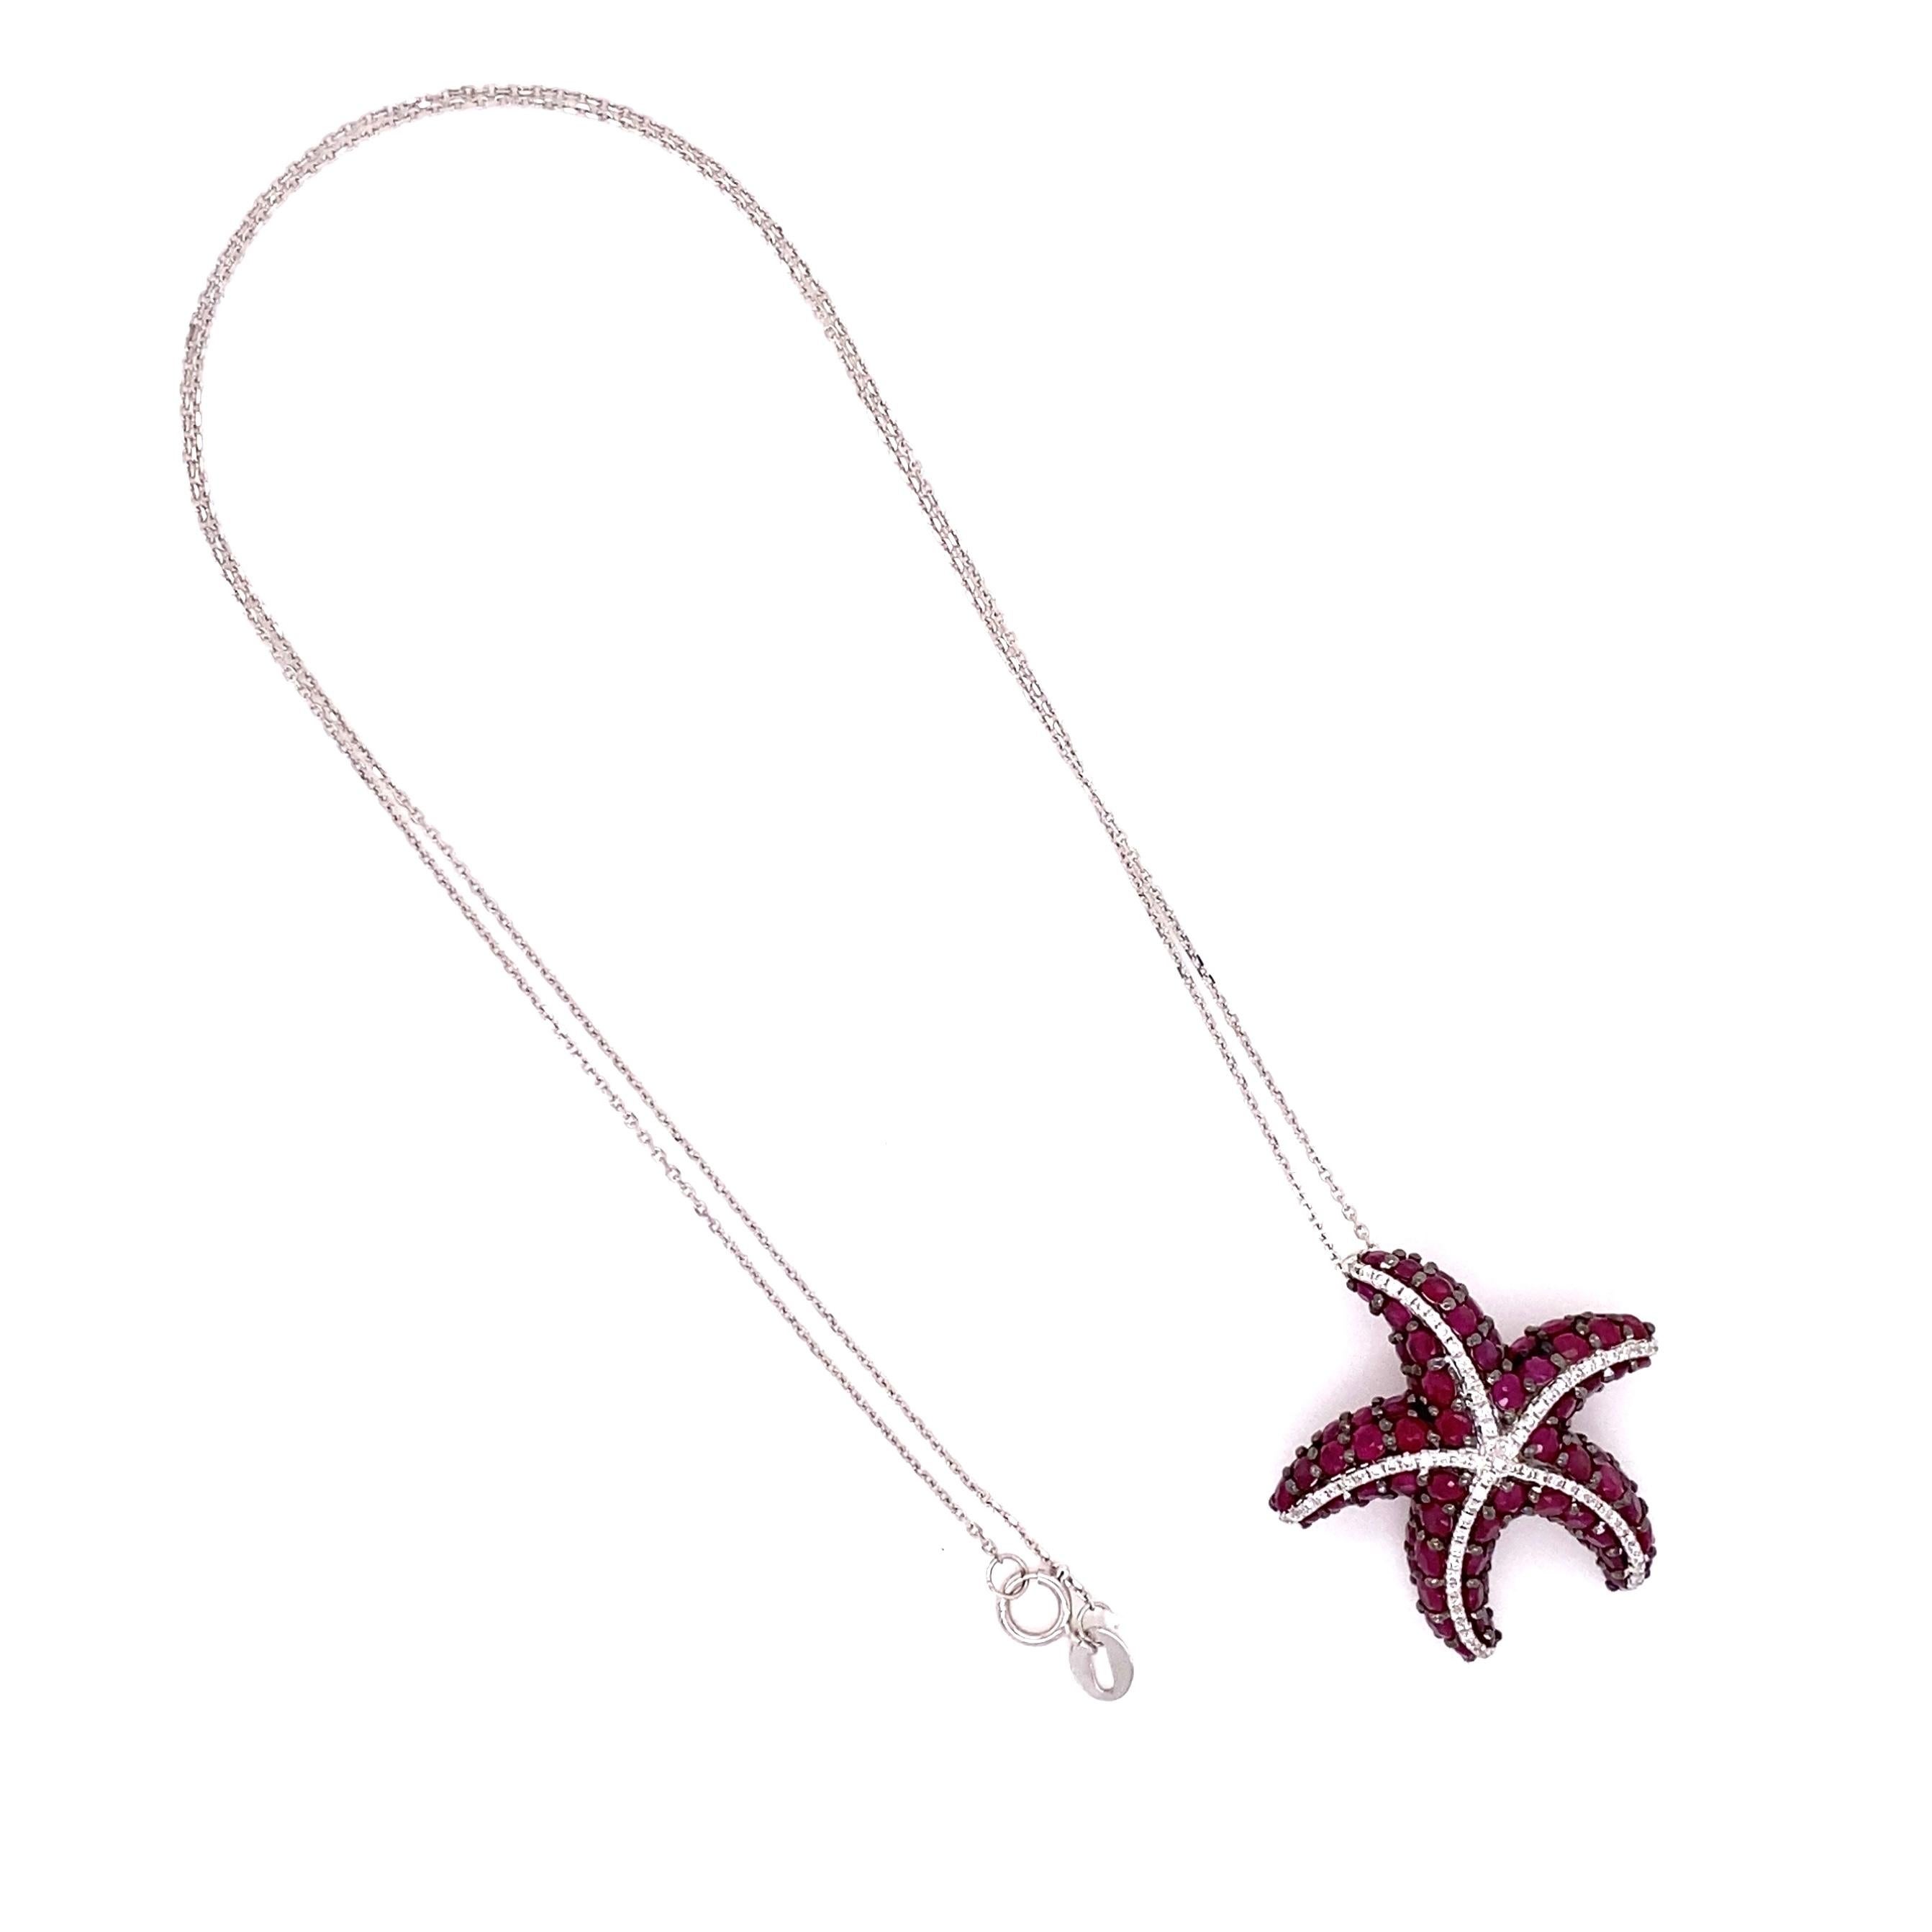 Beautiful Pendant Necklace featuring a Ruby and Diamond Starfish design, approx. 4.54tcw inter-spaced with Diamonds, approx. 0.27tcw. Hand crafted in 18K White Gold. Suspended from an 18